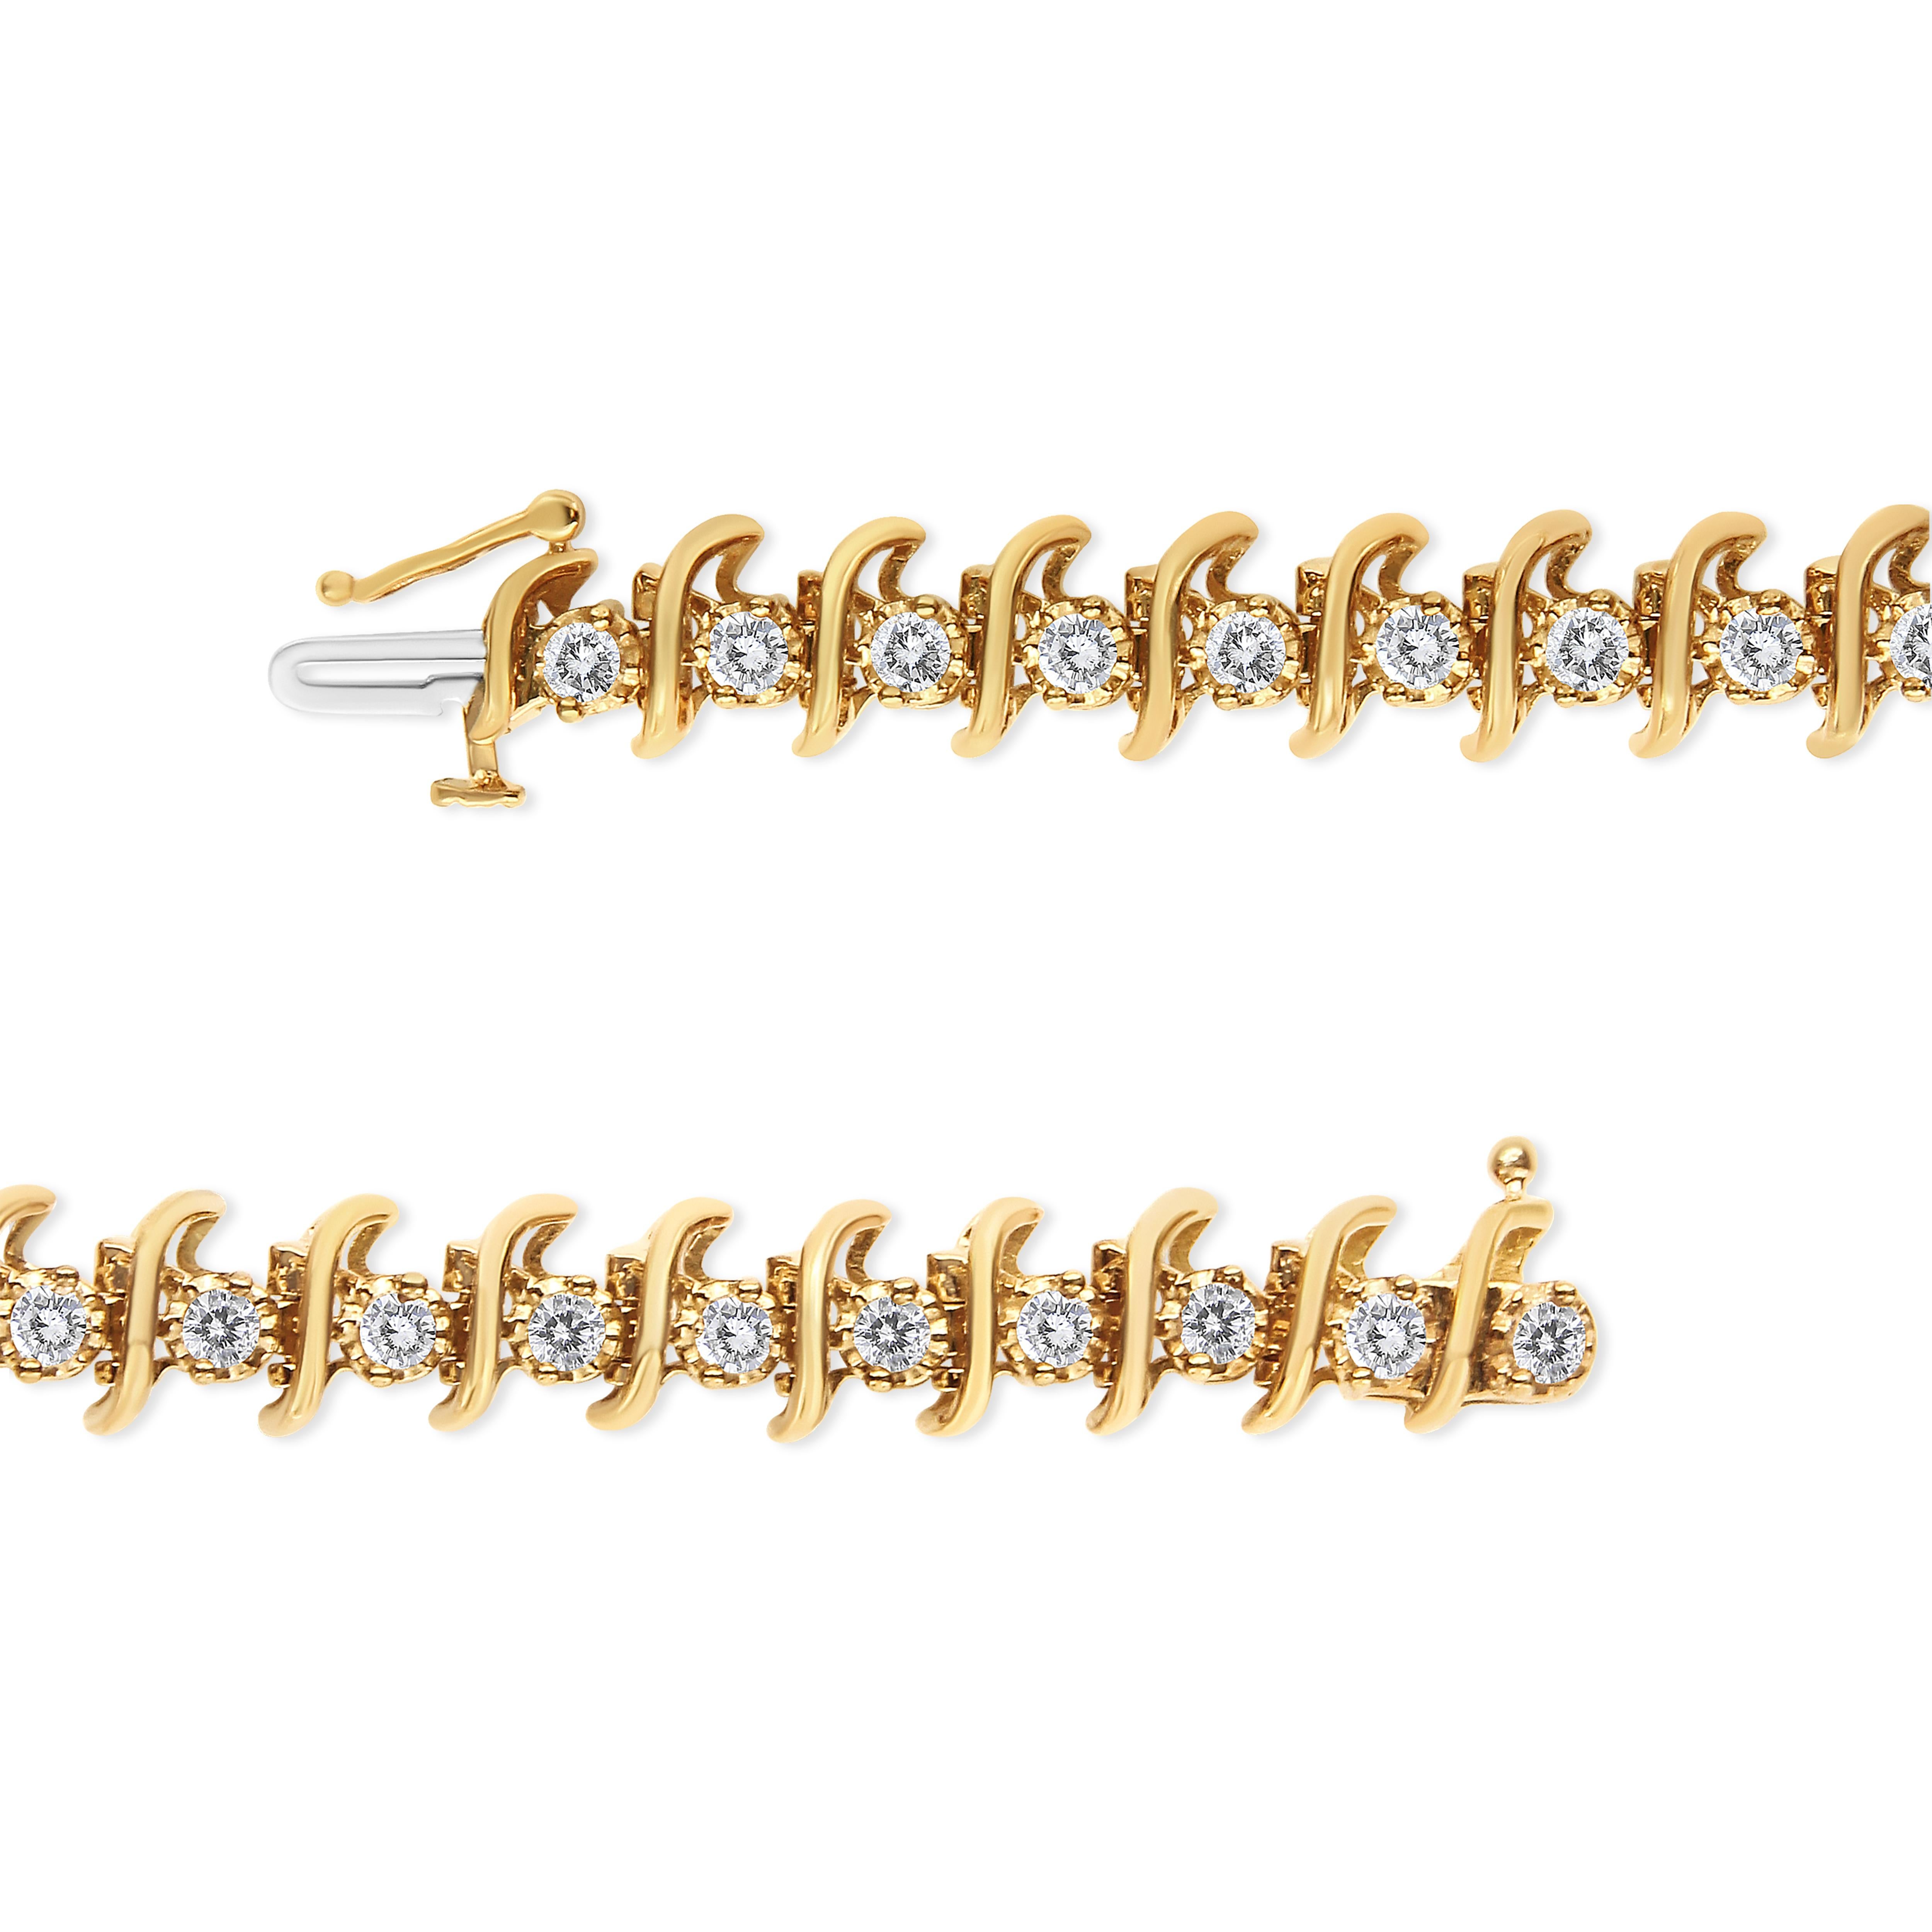 Contemporary Yellow Gold Plated Sterling Silver 3.0 Carat Prong-Set Diamond 